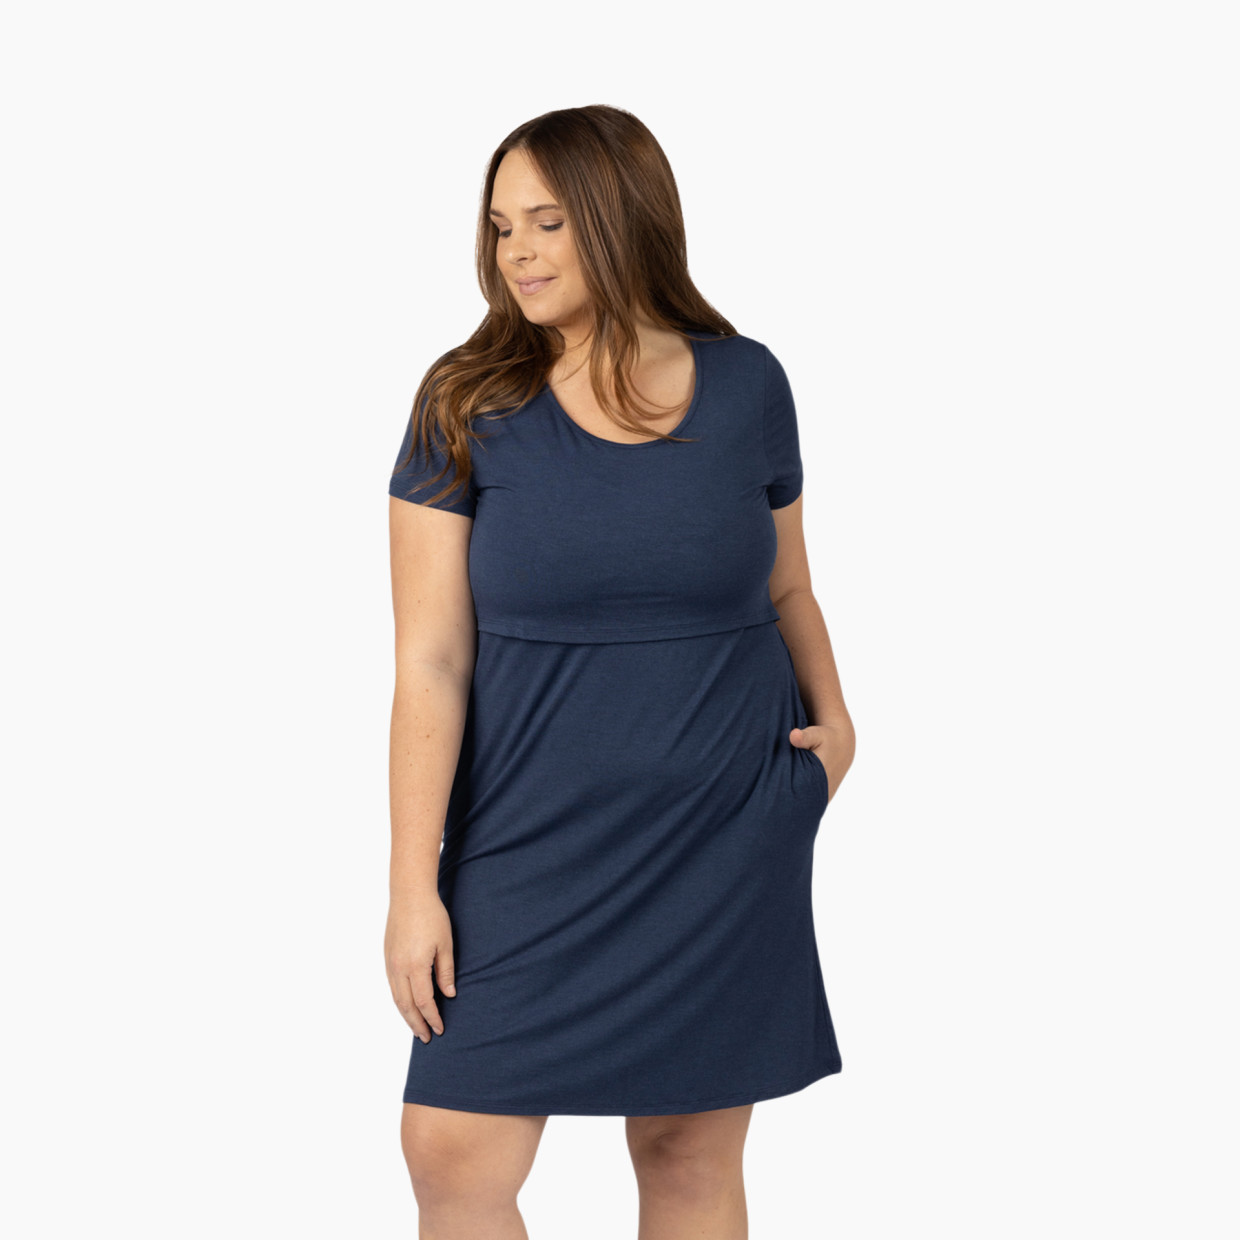 Kindred Bravely Eleanora Ultra Soft Bamboo Maternity And Nursing Lounge Dress - Navy Heather, Small.